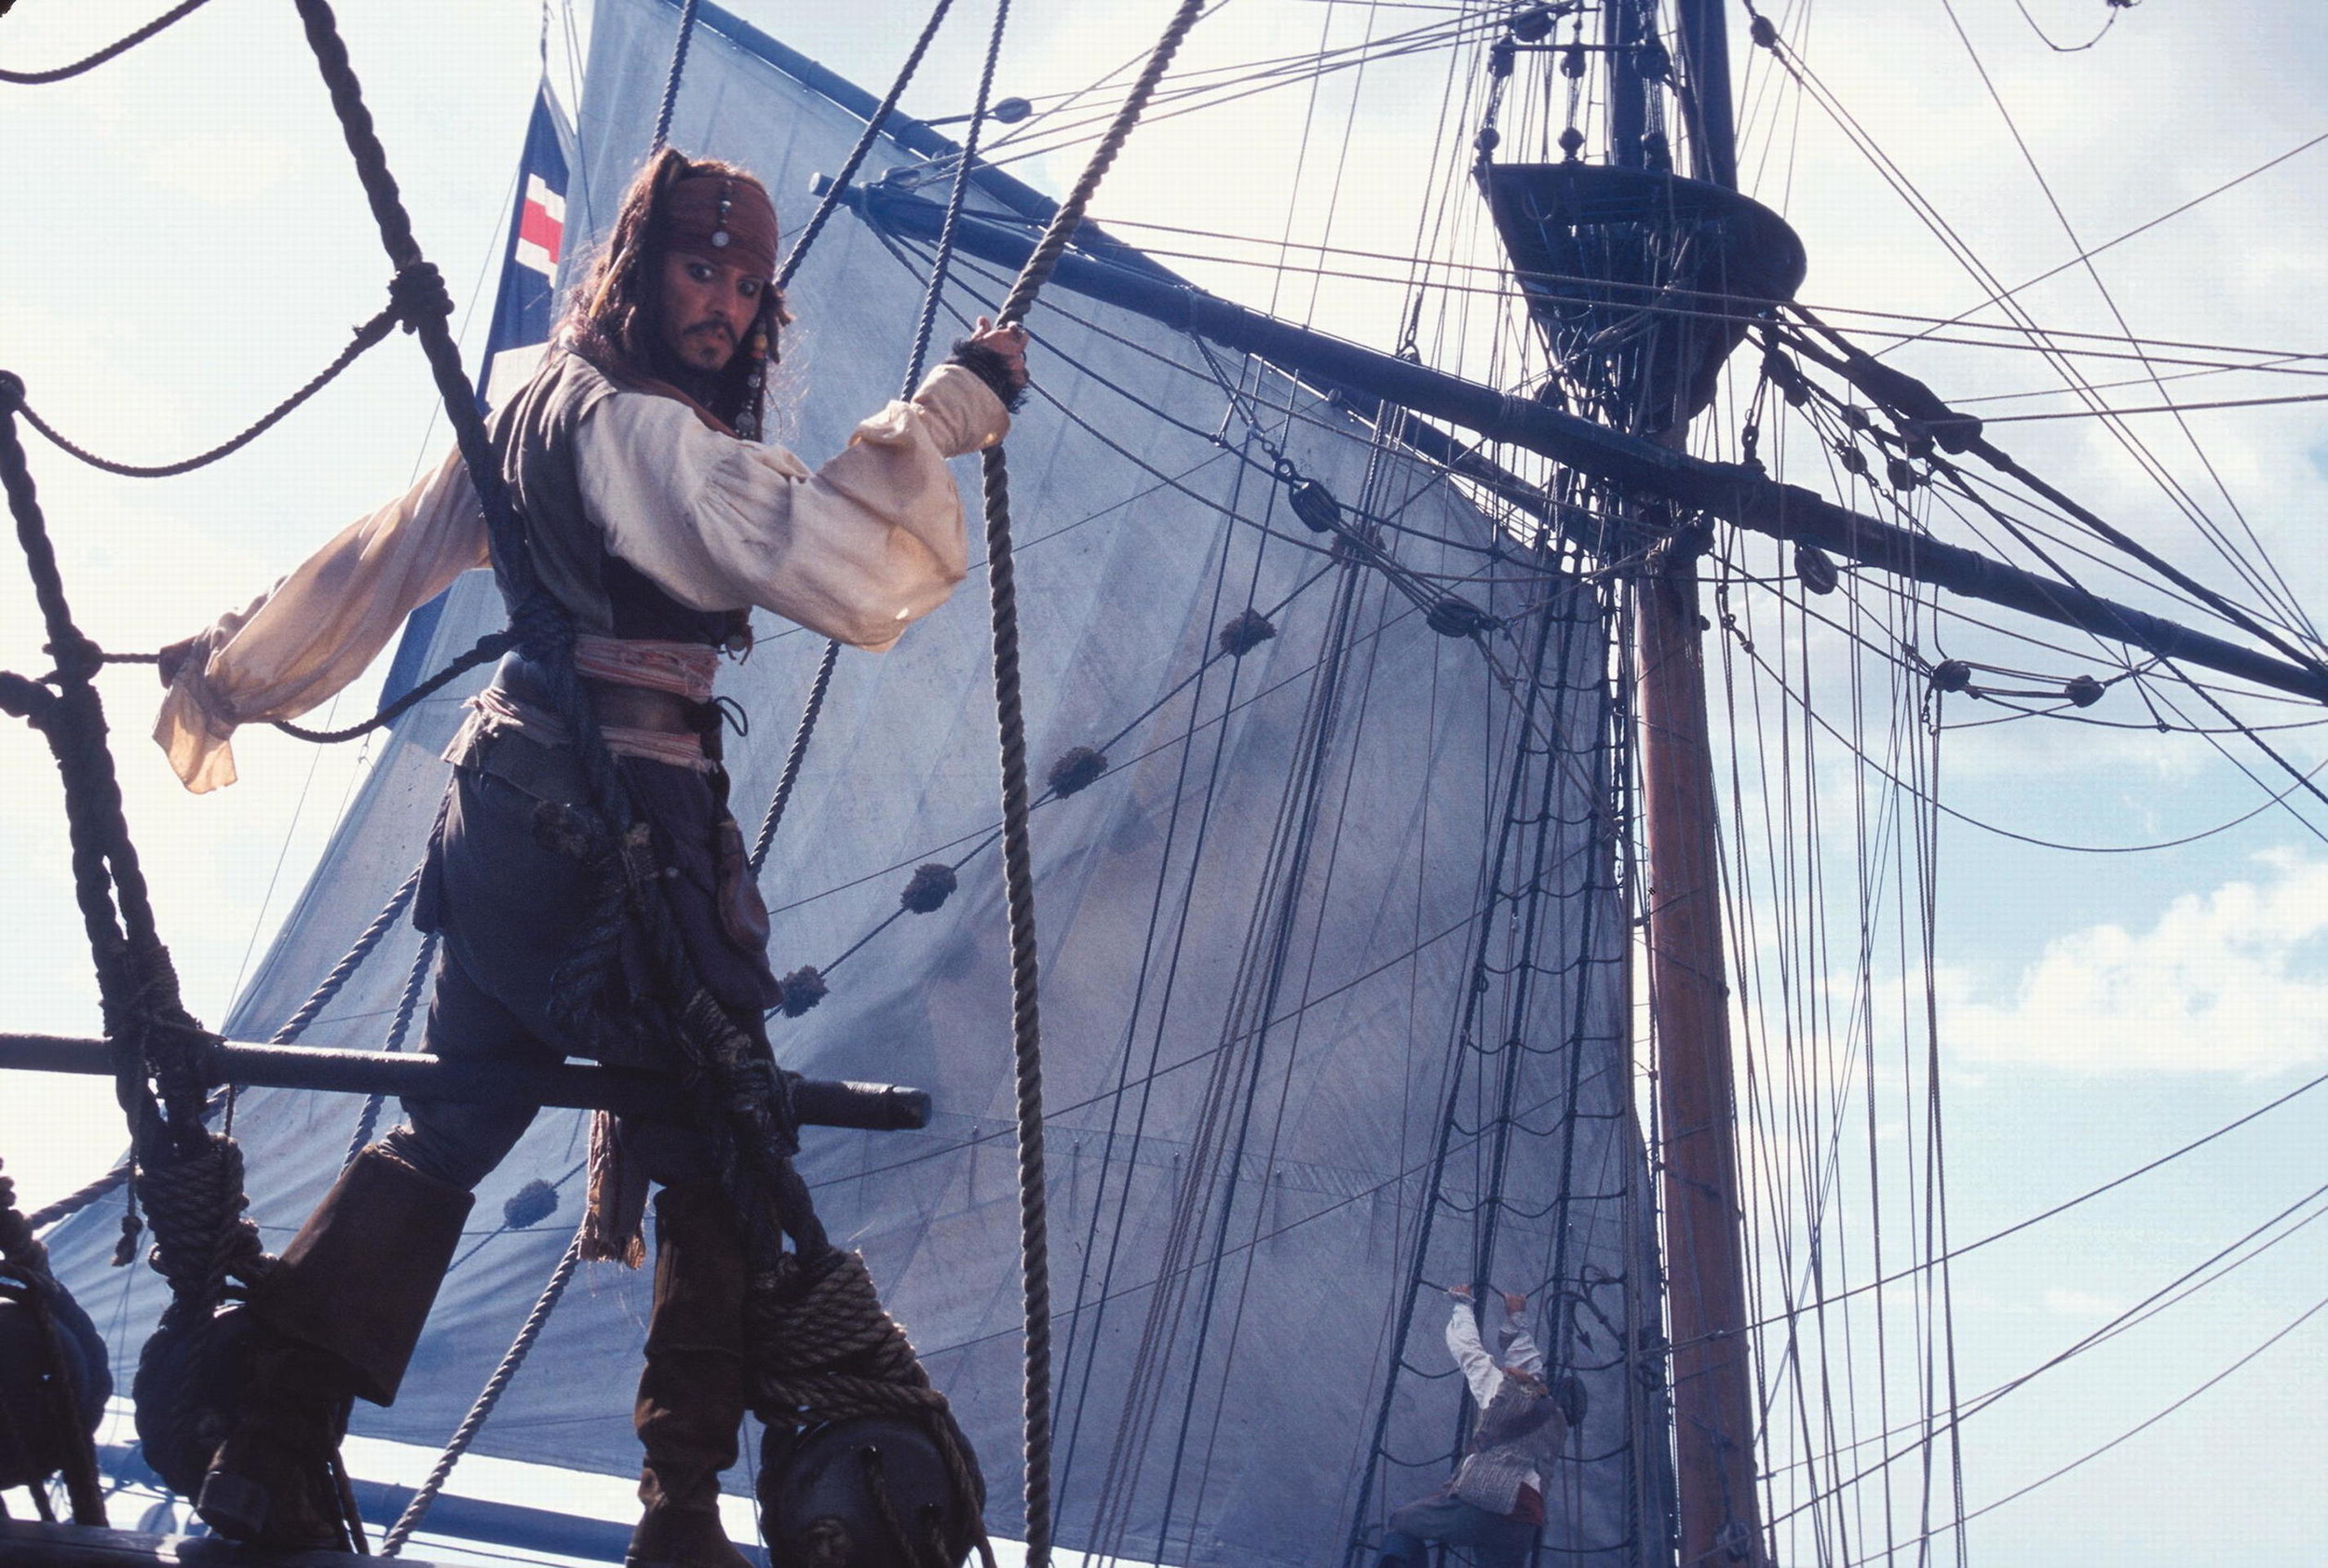 <p>As soon as the project got going, Gore Verbinski was brought in to direct. He was excited to tackle the film because pirate movies had been popular in the “Golden Age of Hollywood,” but had basically disappeared from the film landscape. Verbinski wanted to use modern technology to do a whole new take on the pirate film.</p><p>You may also like: <a href='https://www.yardbarker.com/entertainment/articles/30_heavy_albums_turning_30_in_2024/s1__40099740'>30 heavy albums turning 30 in 2024</a></p>